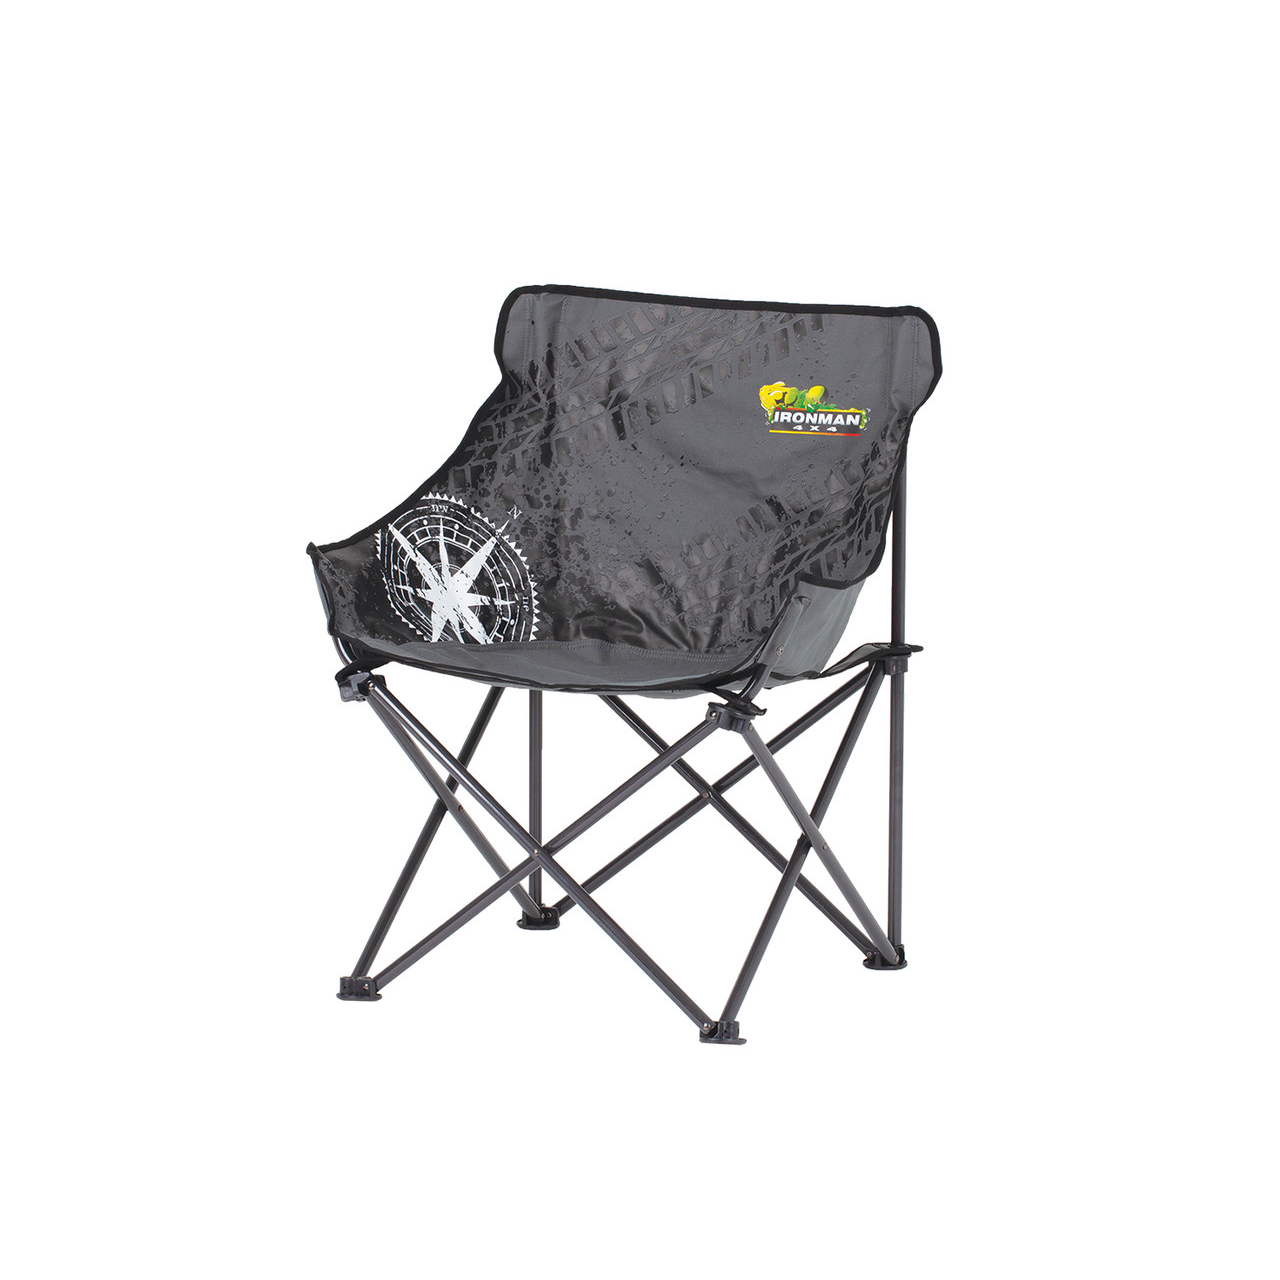 MID SIZE LOW BACK CAMP CHAIR – BLACK/GREY